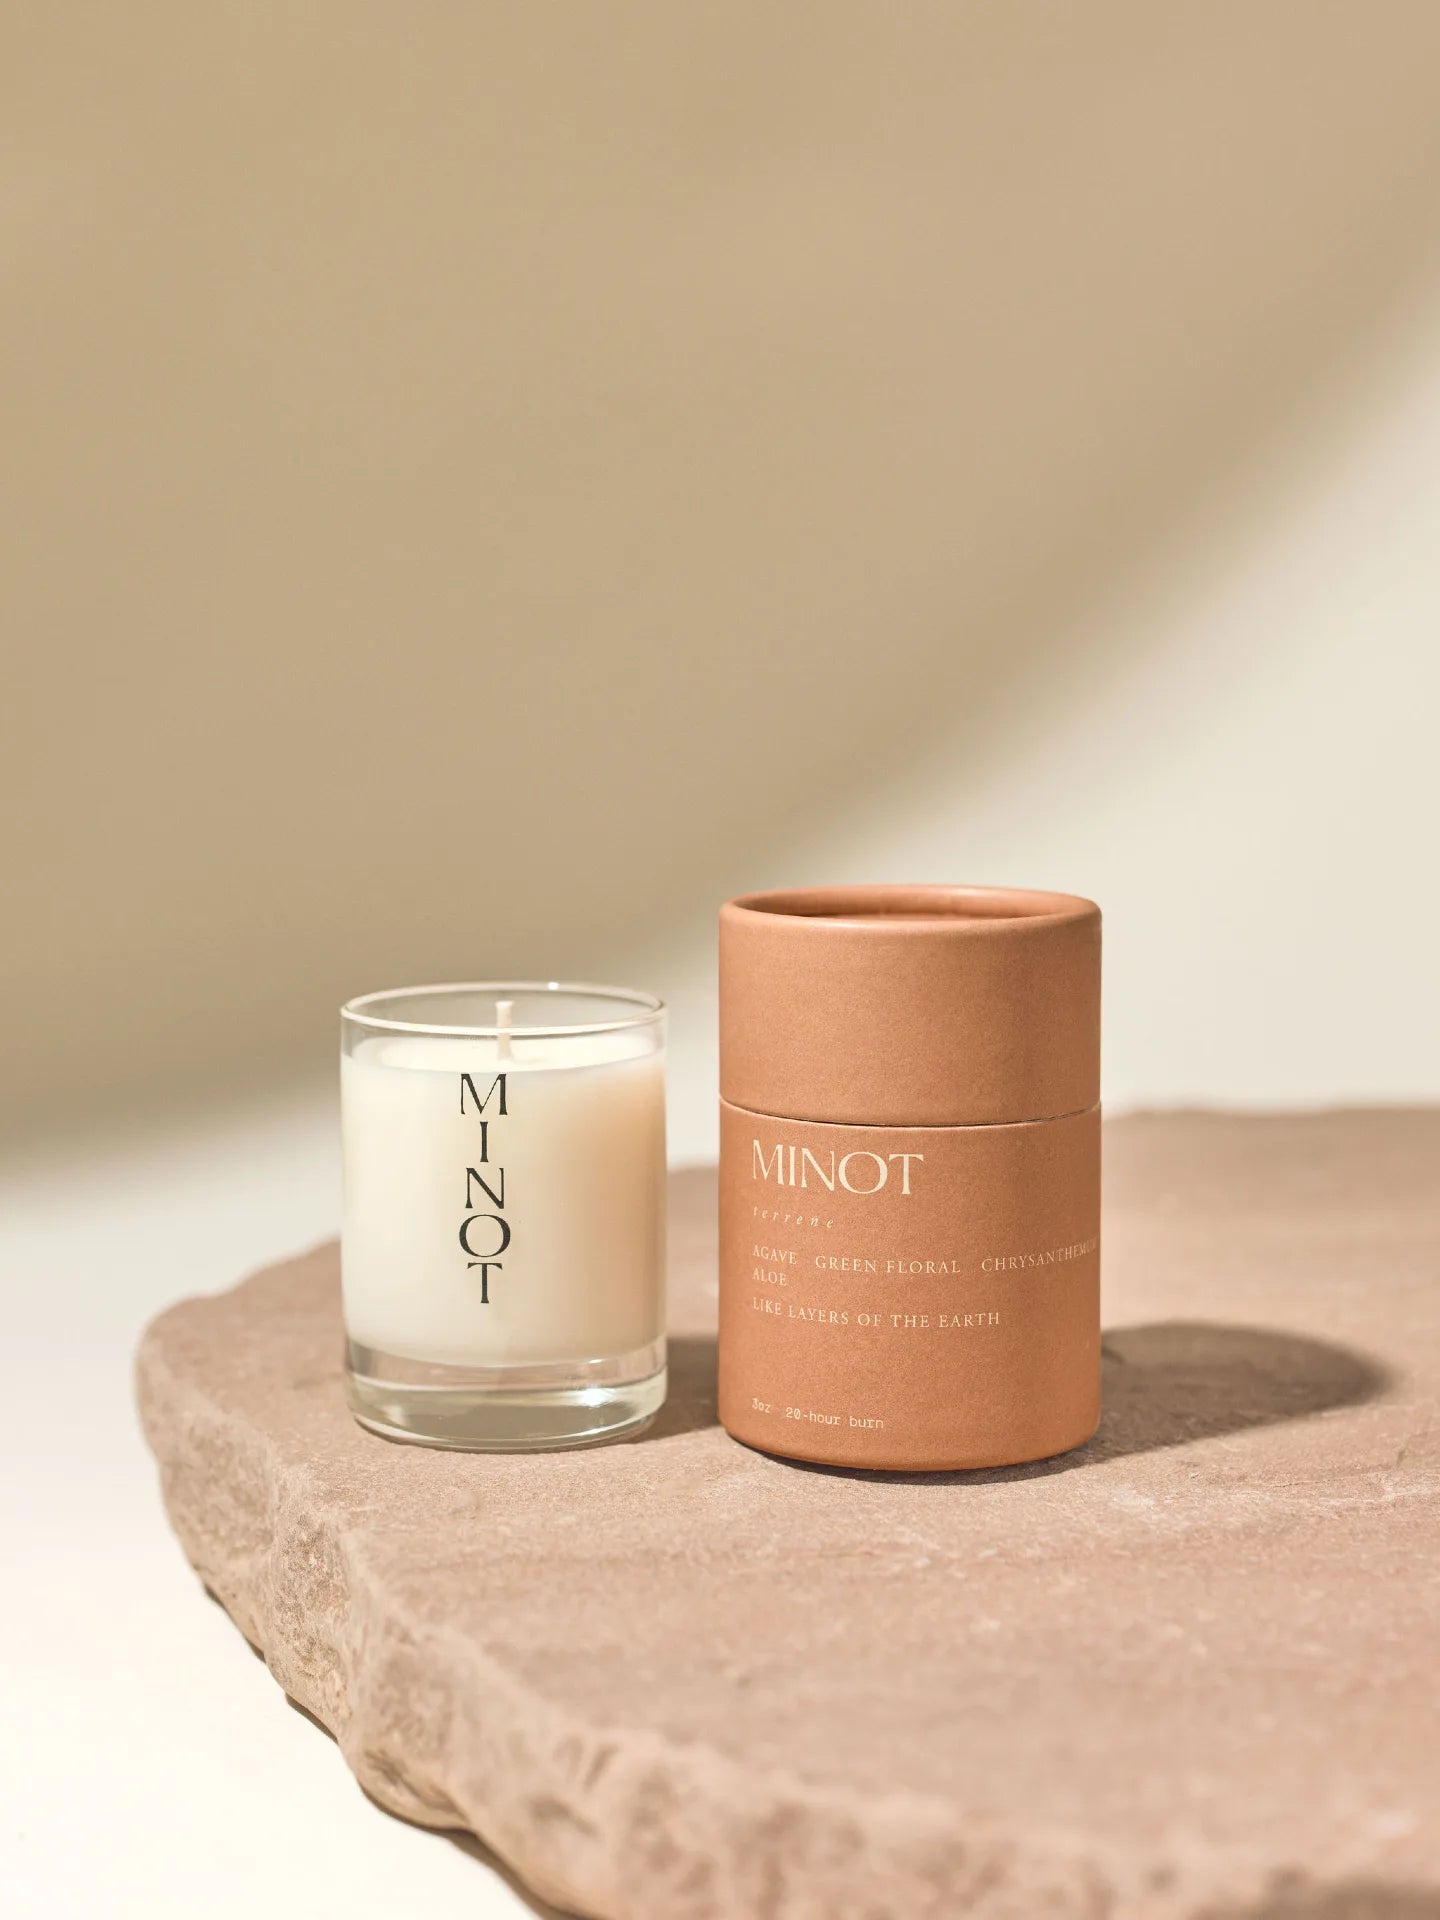 The Terrene Mini is an earthy, green travel candle with agave, green floral, chrysanthemum, and aloe